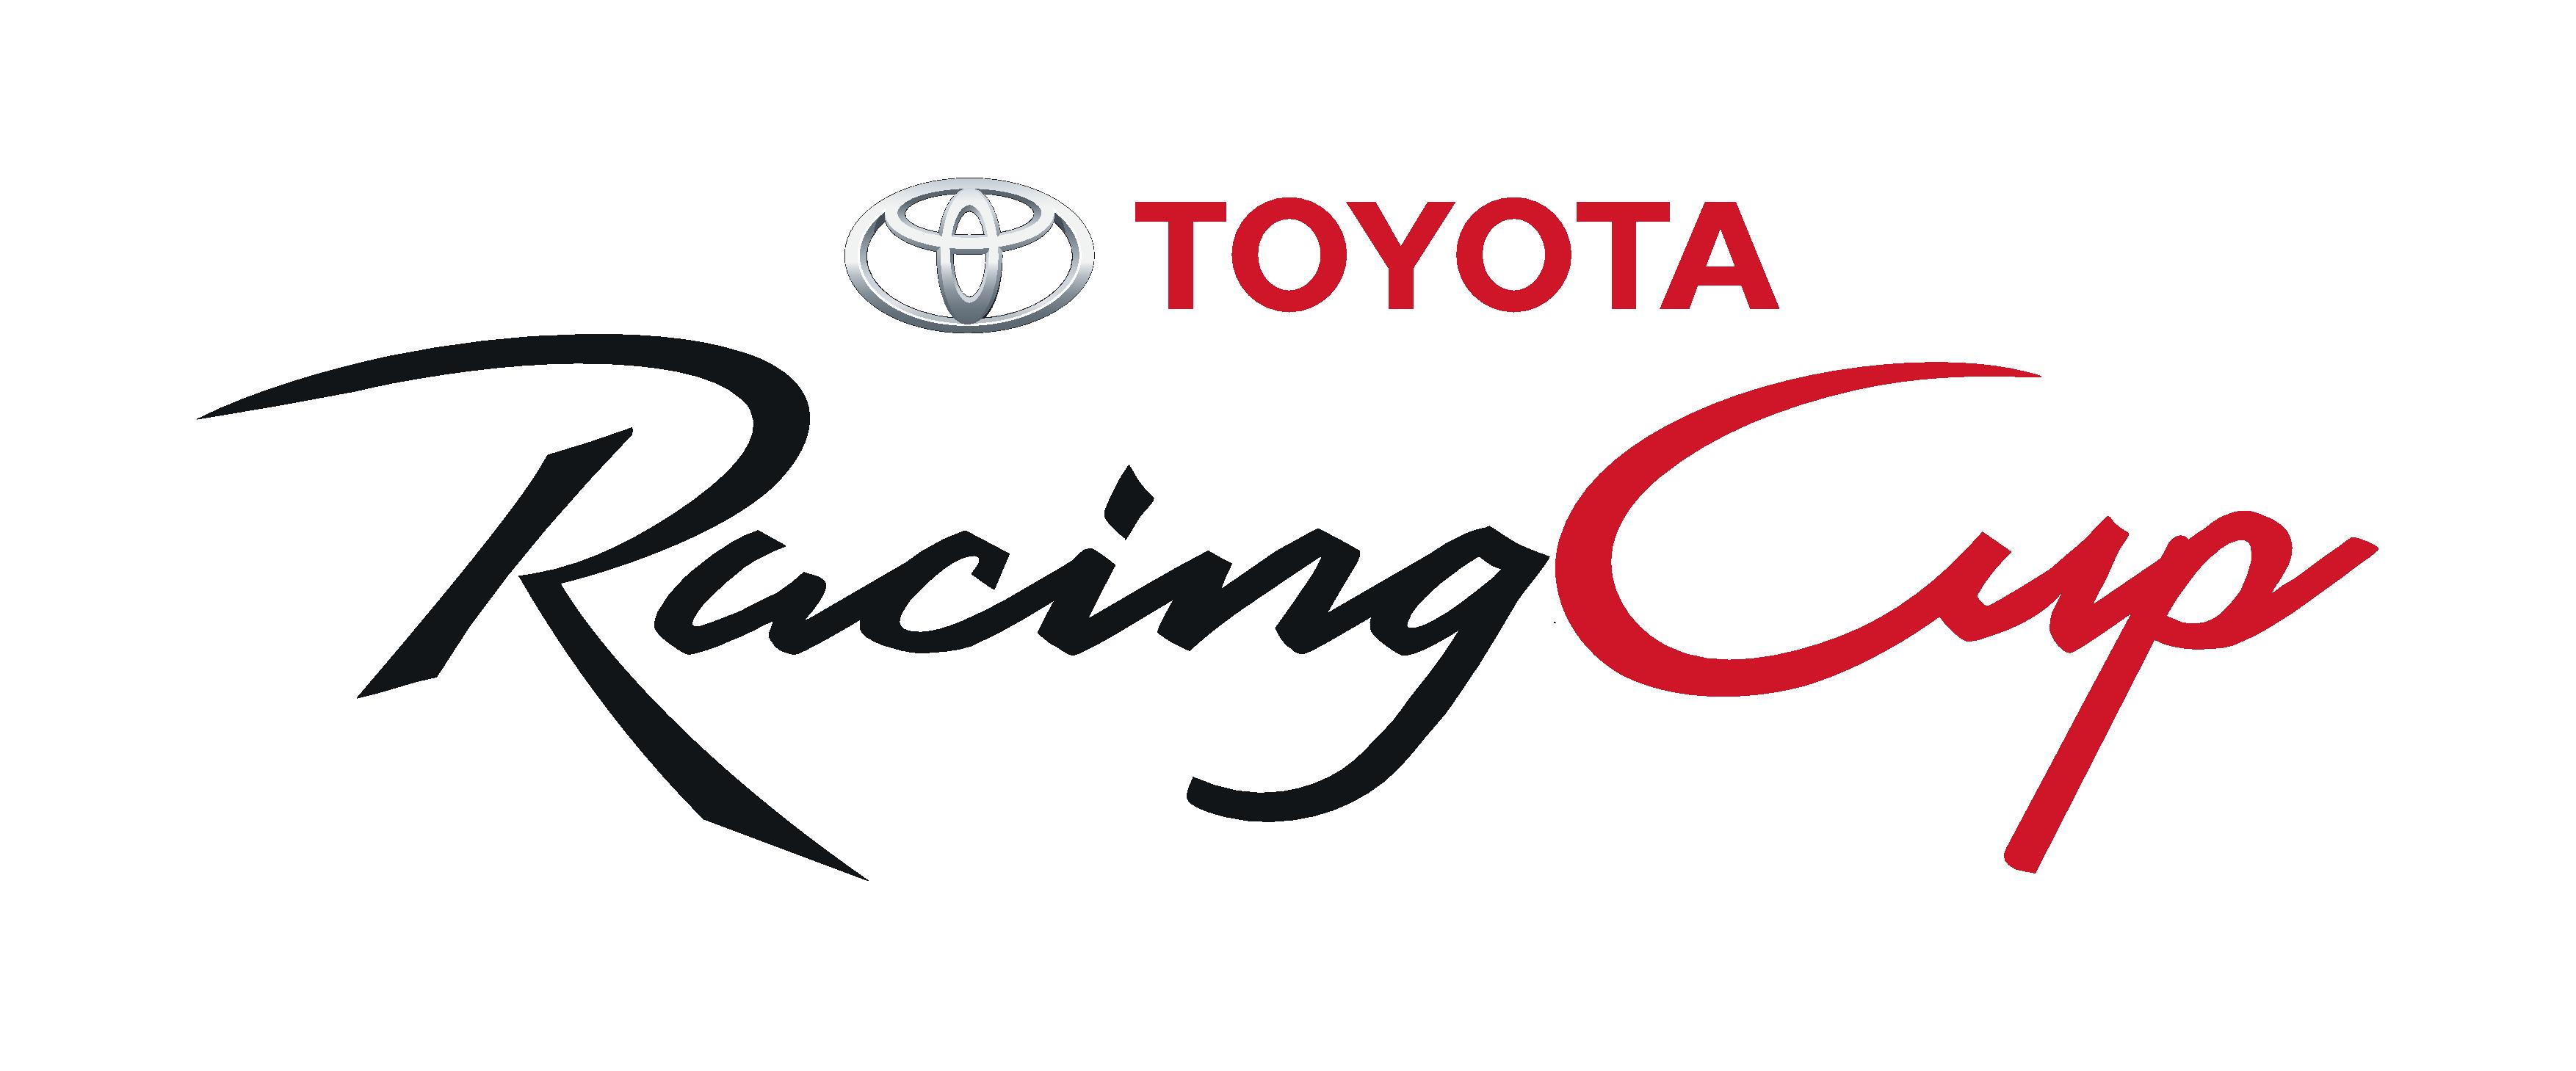 Toyota Racing Cup 2019 logo page 001